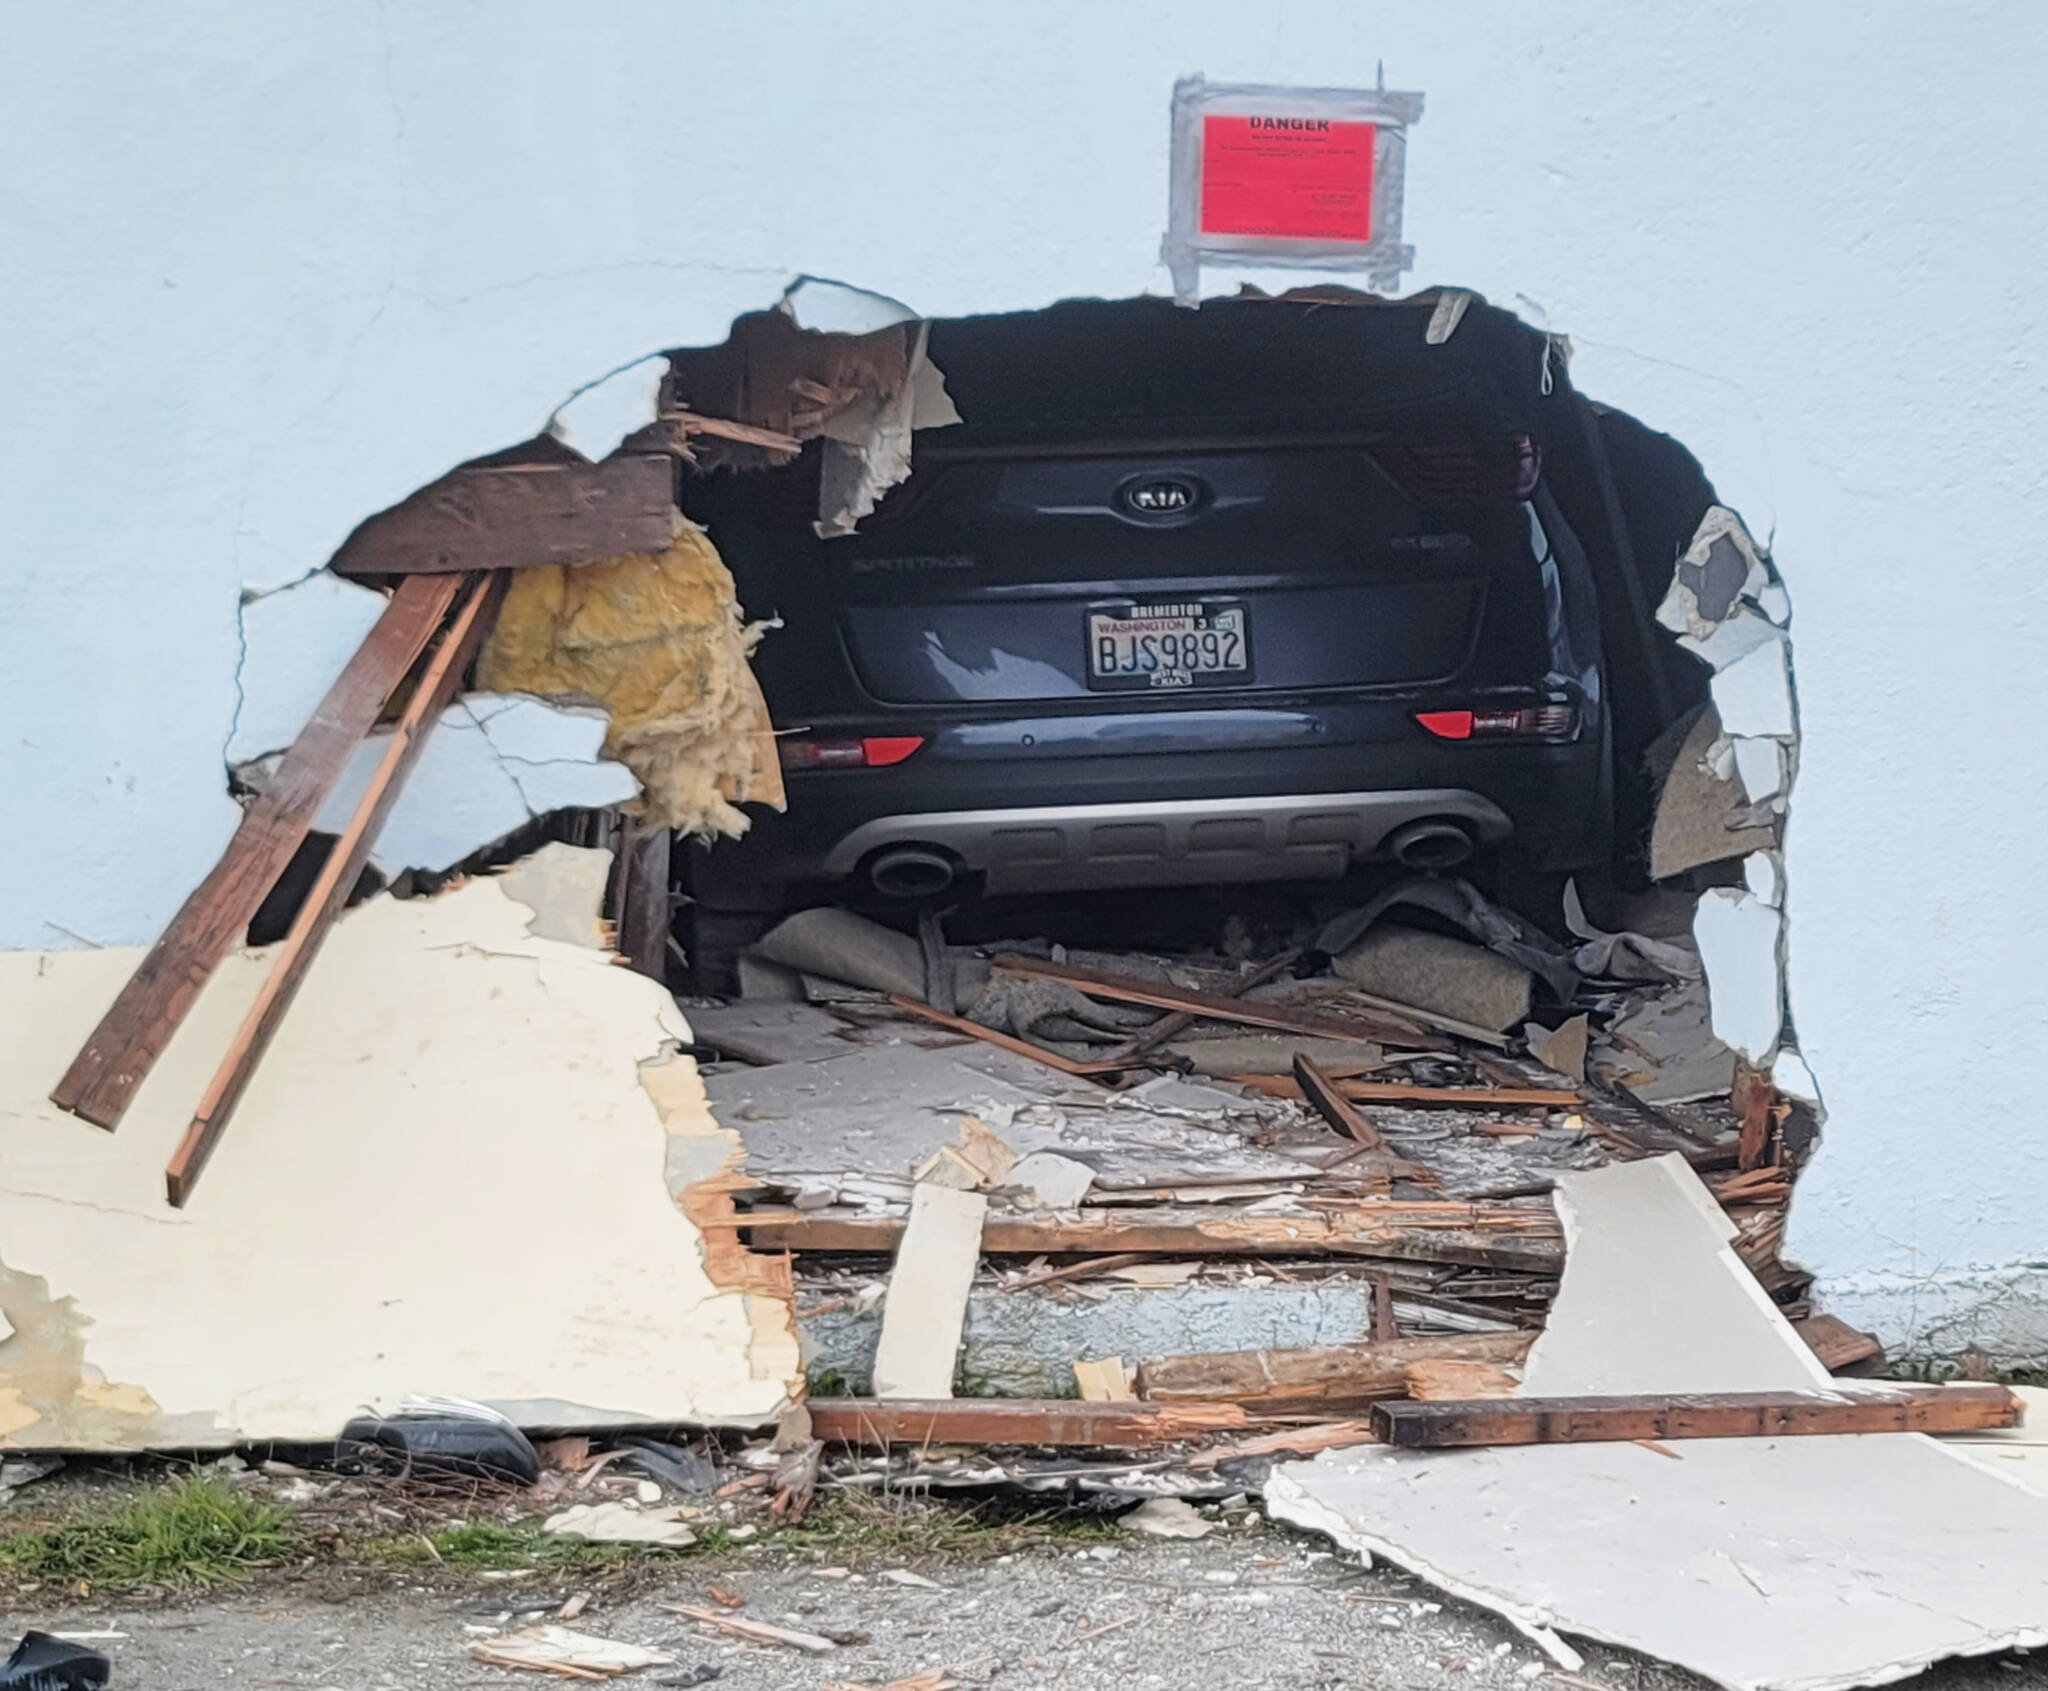 A car that was out of control because of the driver’s medical emergency lodged within an apartment building in Port Angeles on Saturday. (Van Hurst/For Peninsula Daily News)